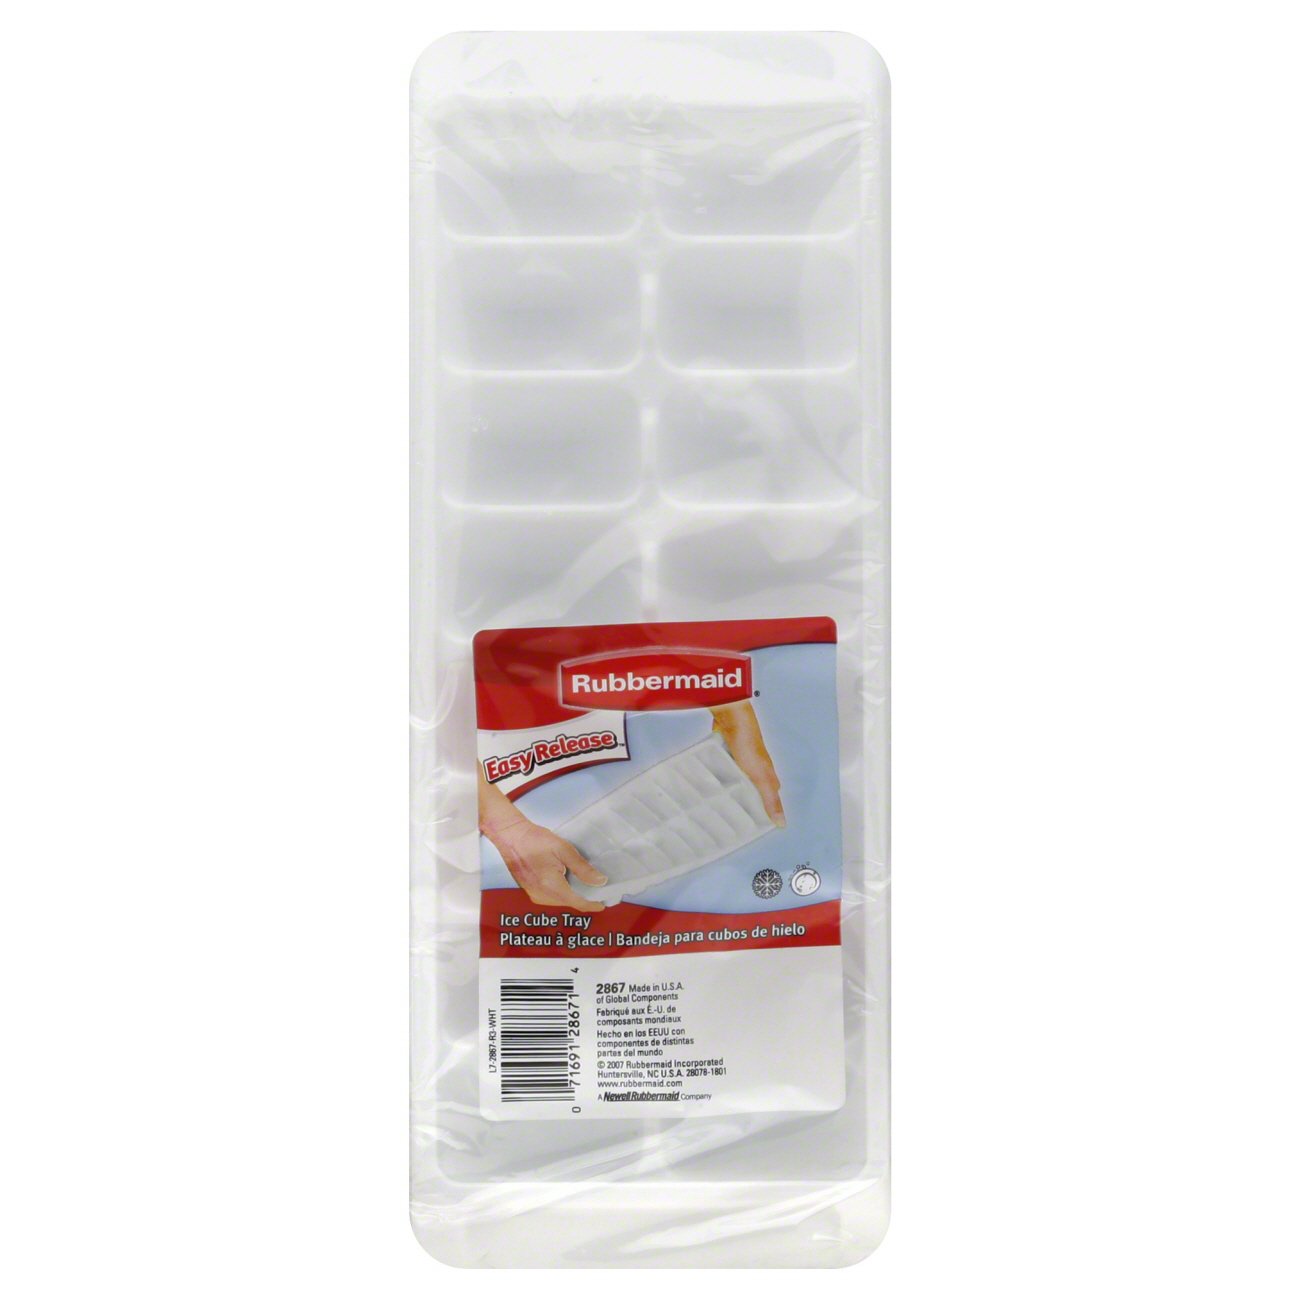 Rubbermaid Easy Release Ice Cube Tray - Shop Utensils & Gadgets at H-E-B